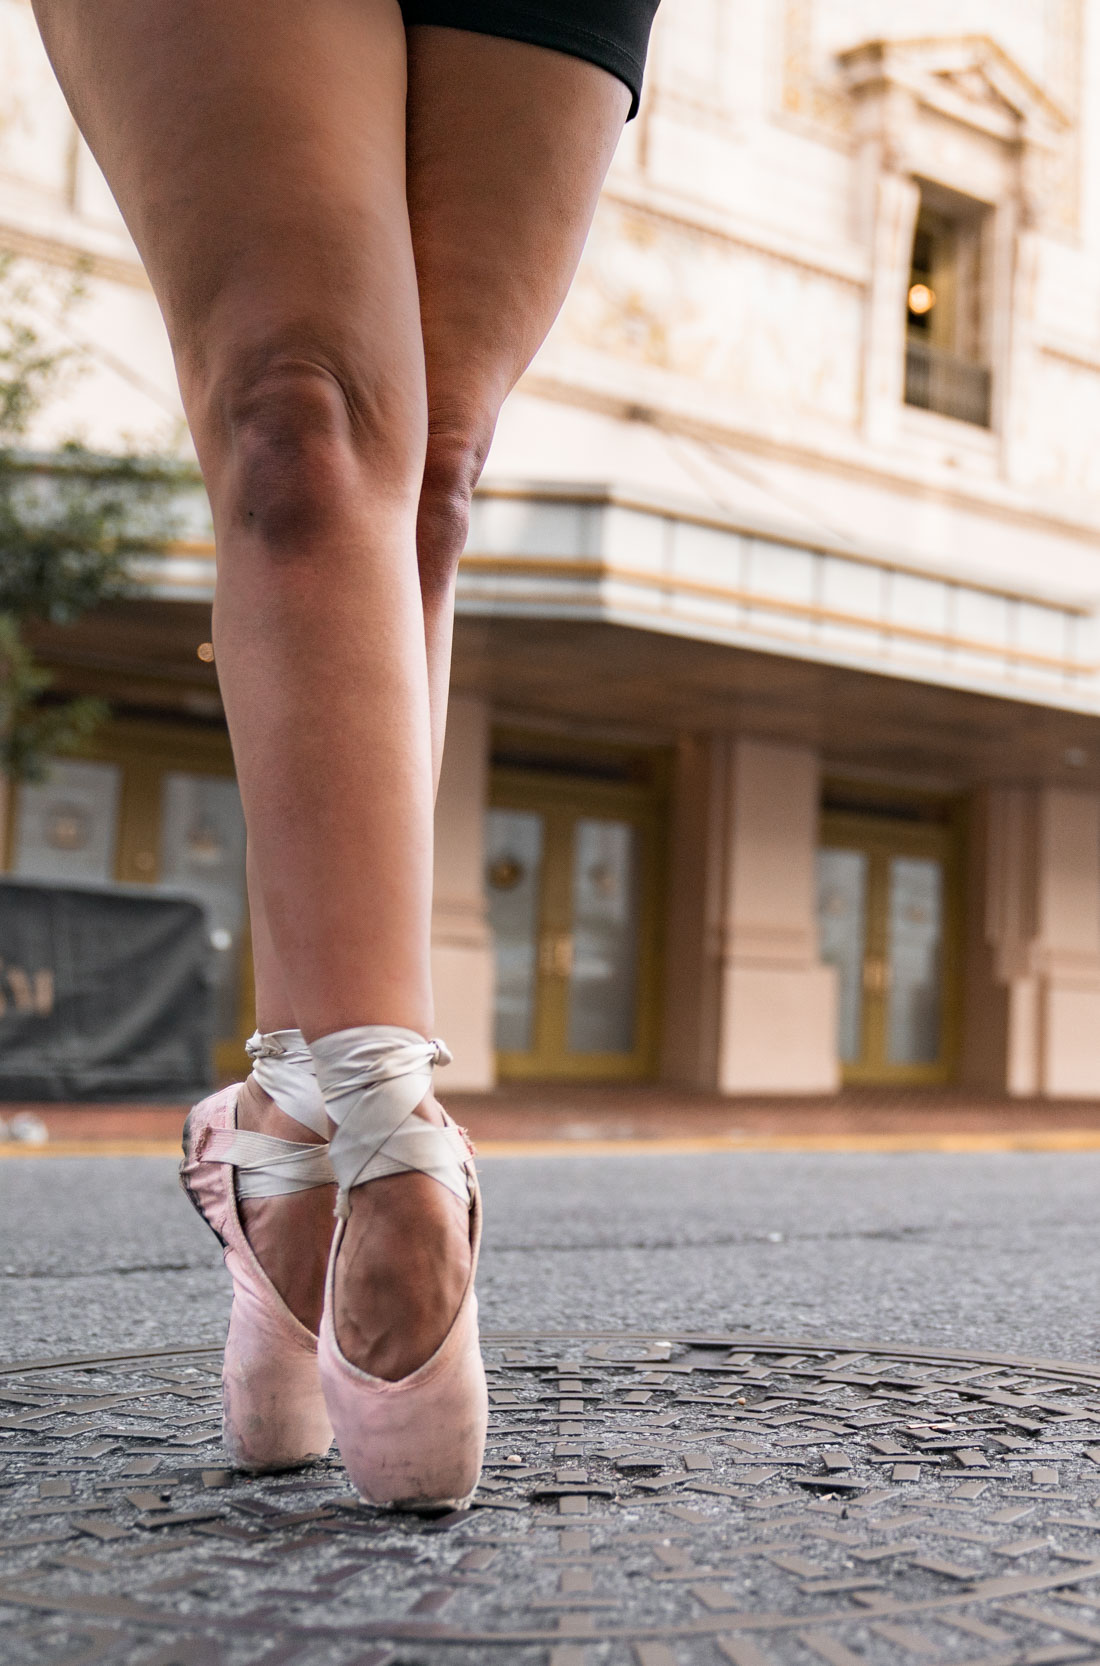 Ballet dancer’s shoes in front of the Orpheum Theater in New Orleans